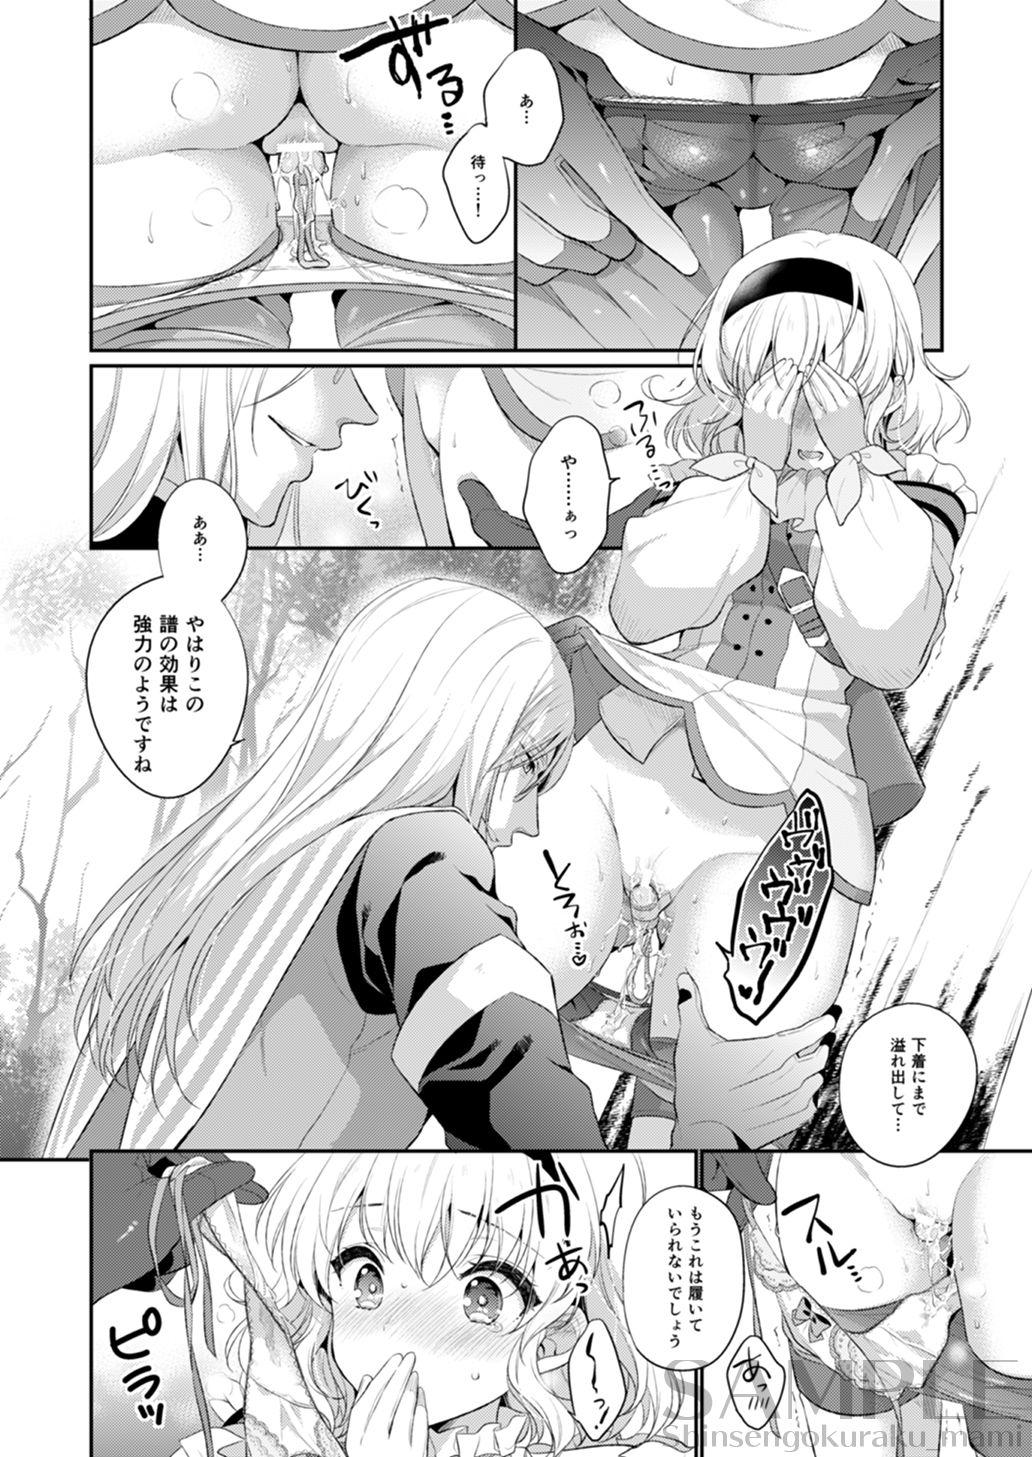 Van dolcemente - Tales of the abyss Blond - Page 11